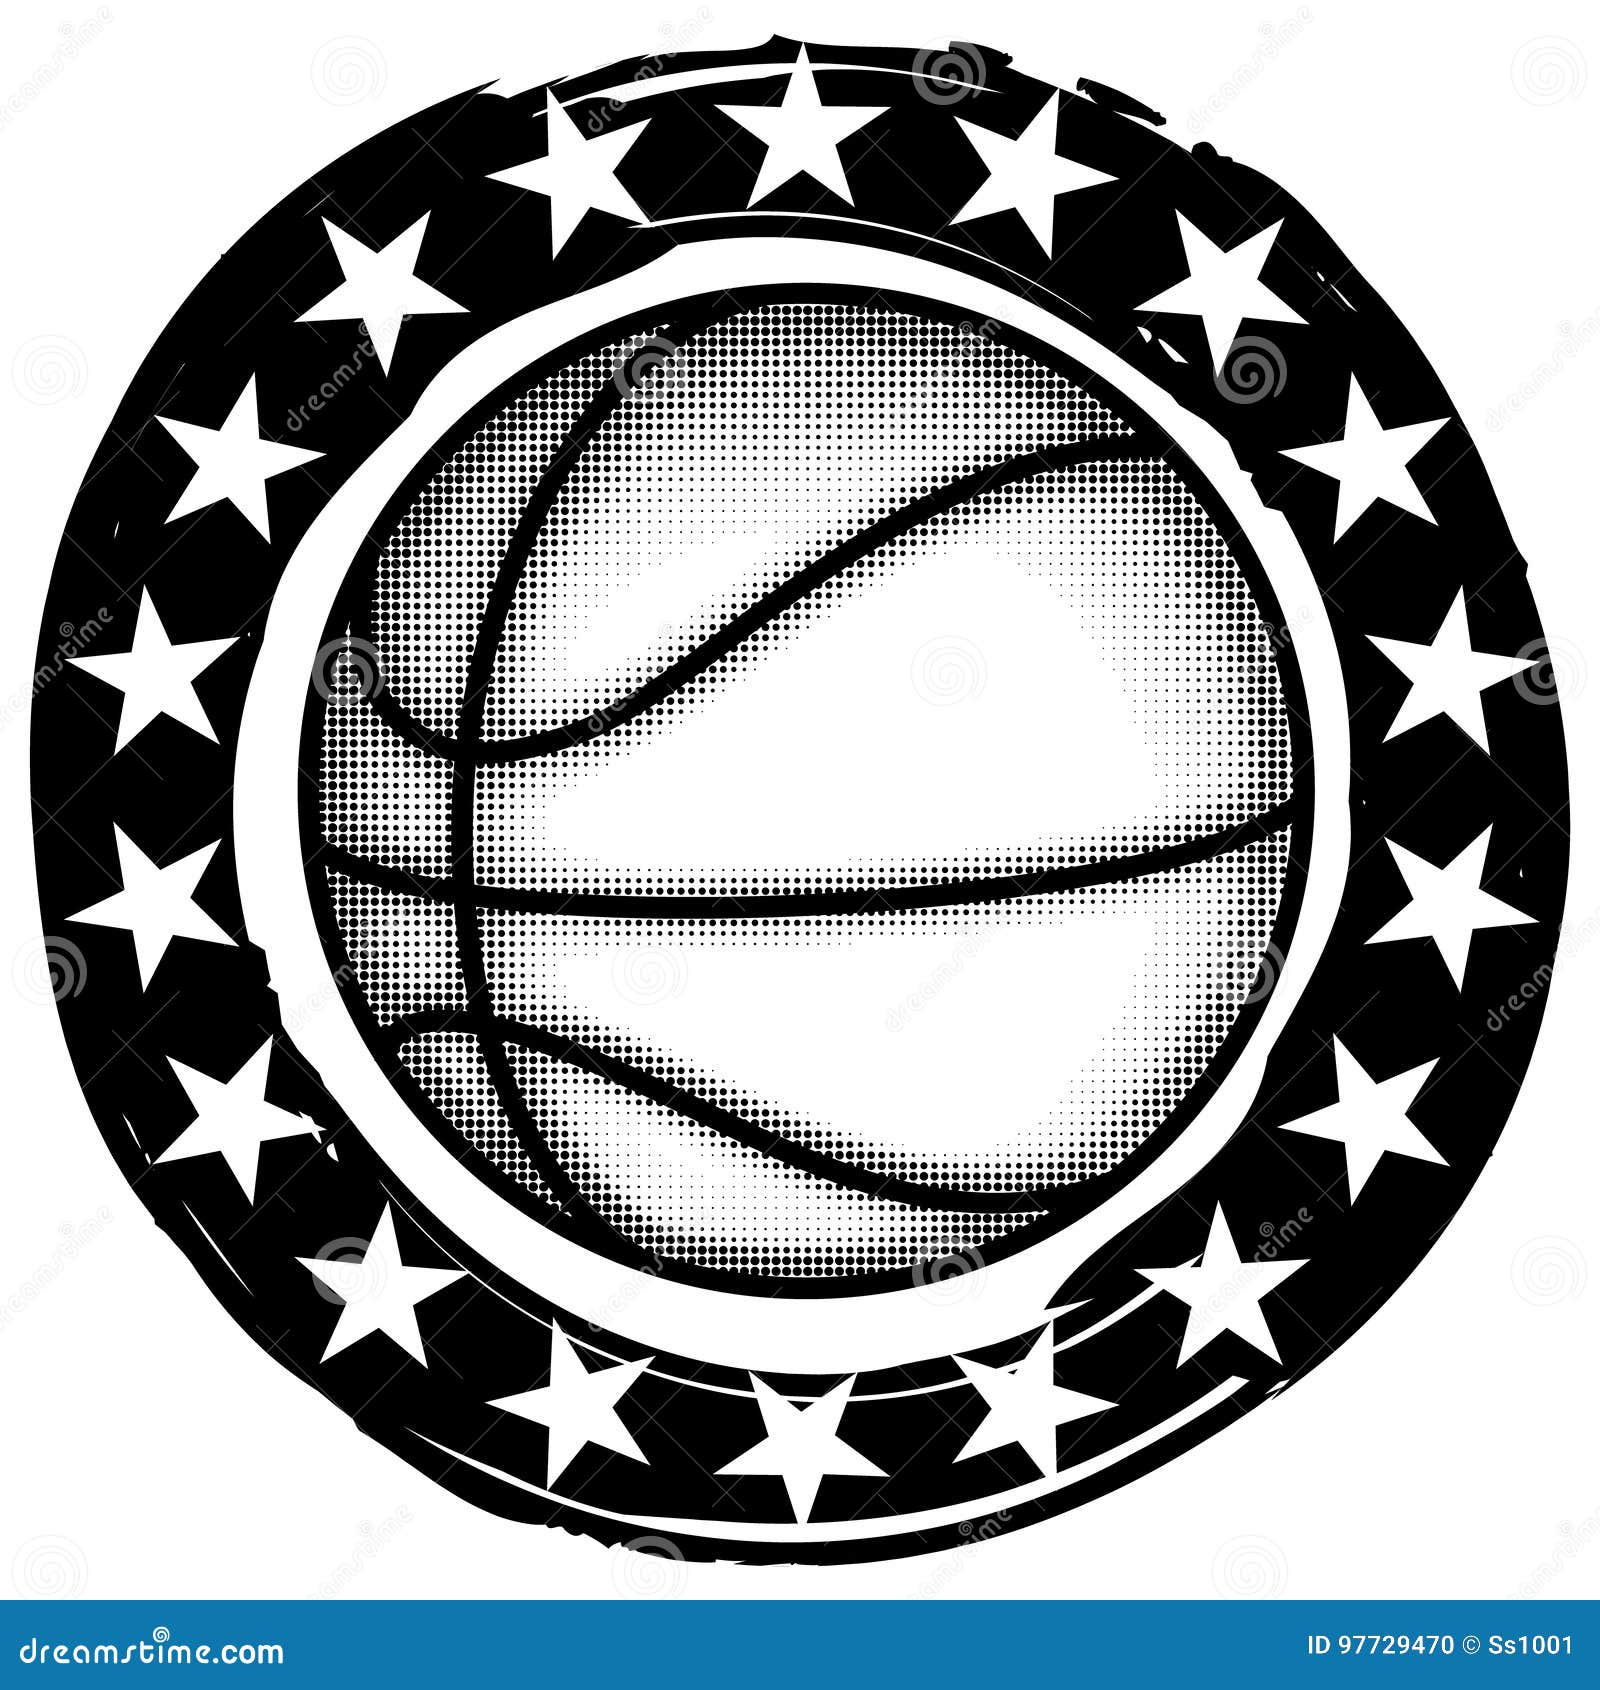 8 Best Basketball Tattoo Designs and Pictures! | Basketball tattoos, Tattoos  for guys, Shoulder tattoo